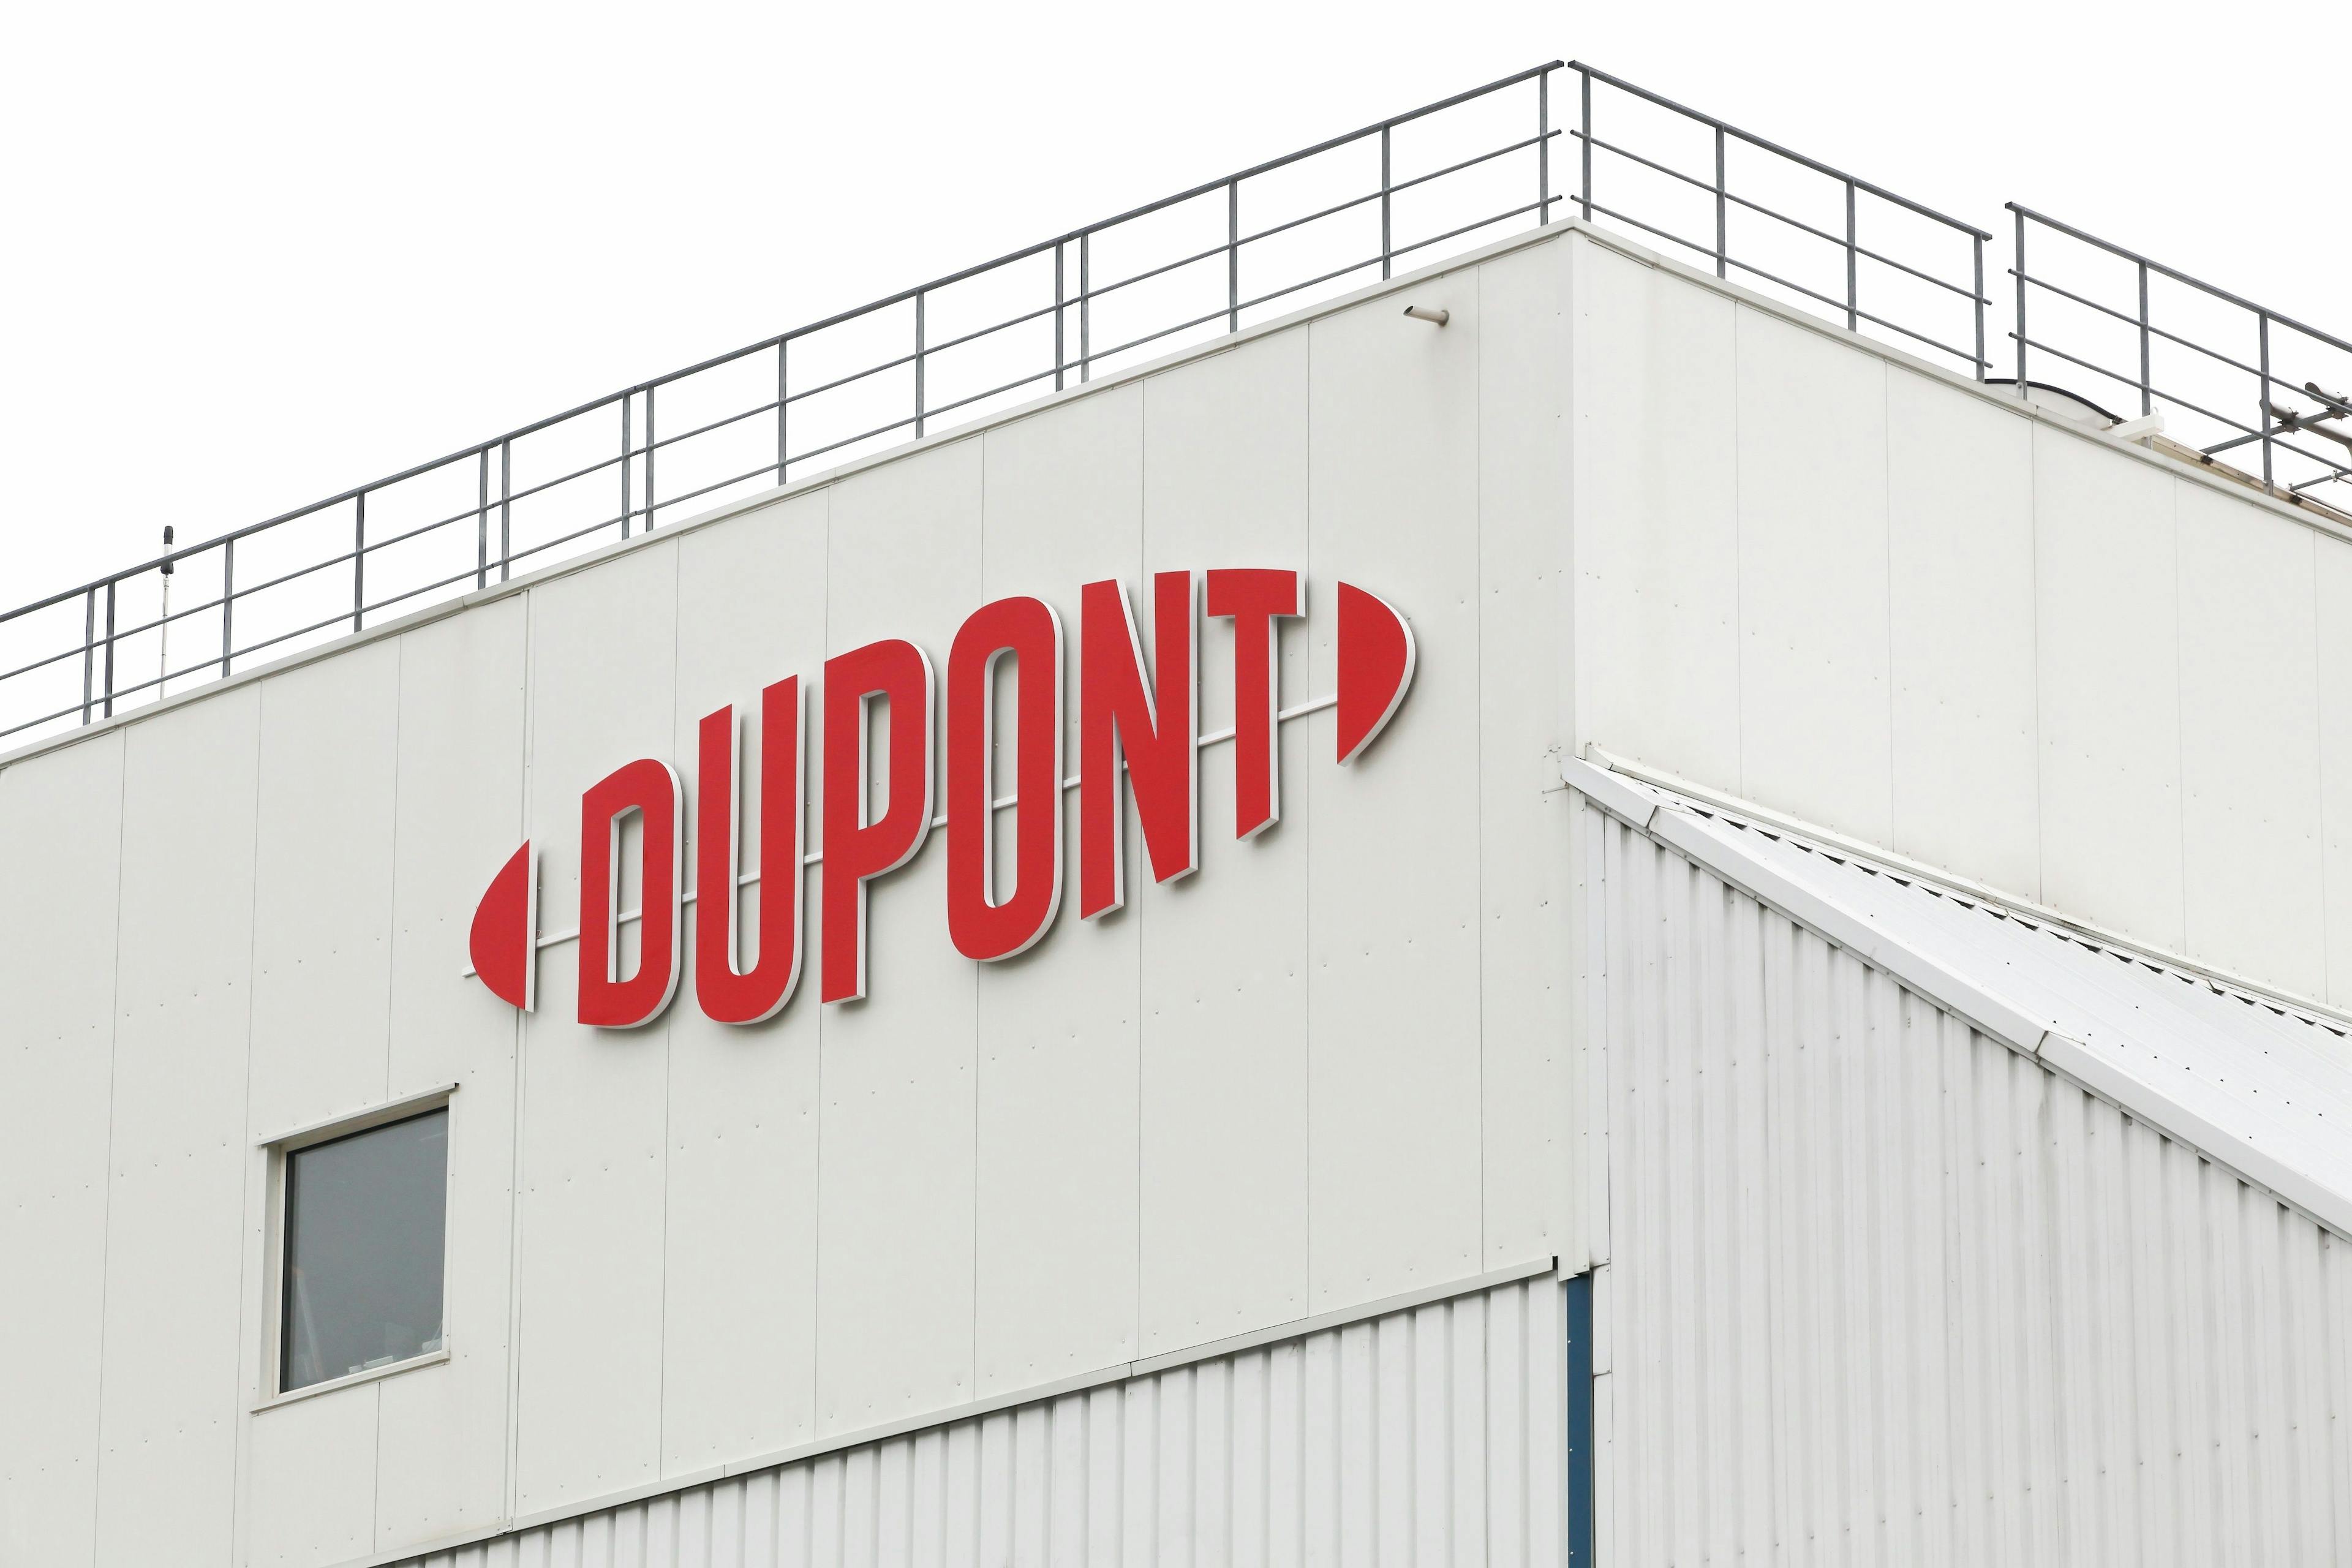 Sassenage, France - September 10, 2019: DuPont factory in France. DuPont is one of America's most innovative companies and it is an American chemical company | Image Credit: © Ricochet64 - stock.adobe.com